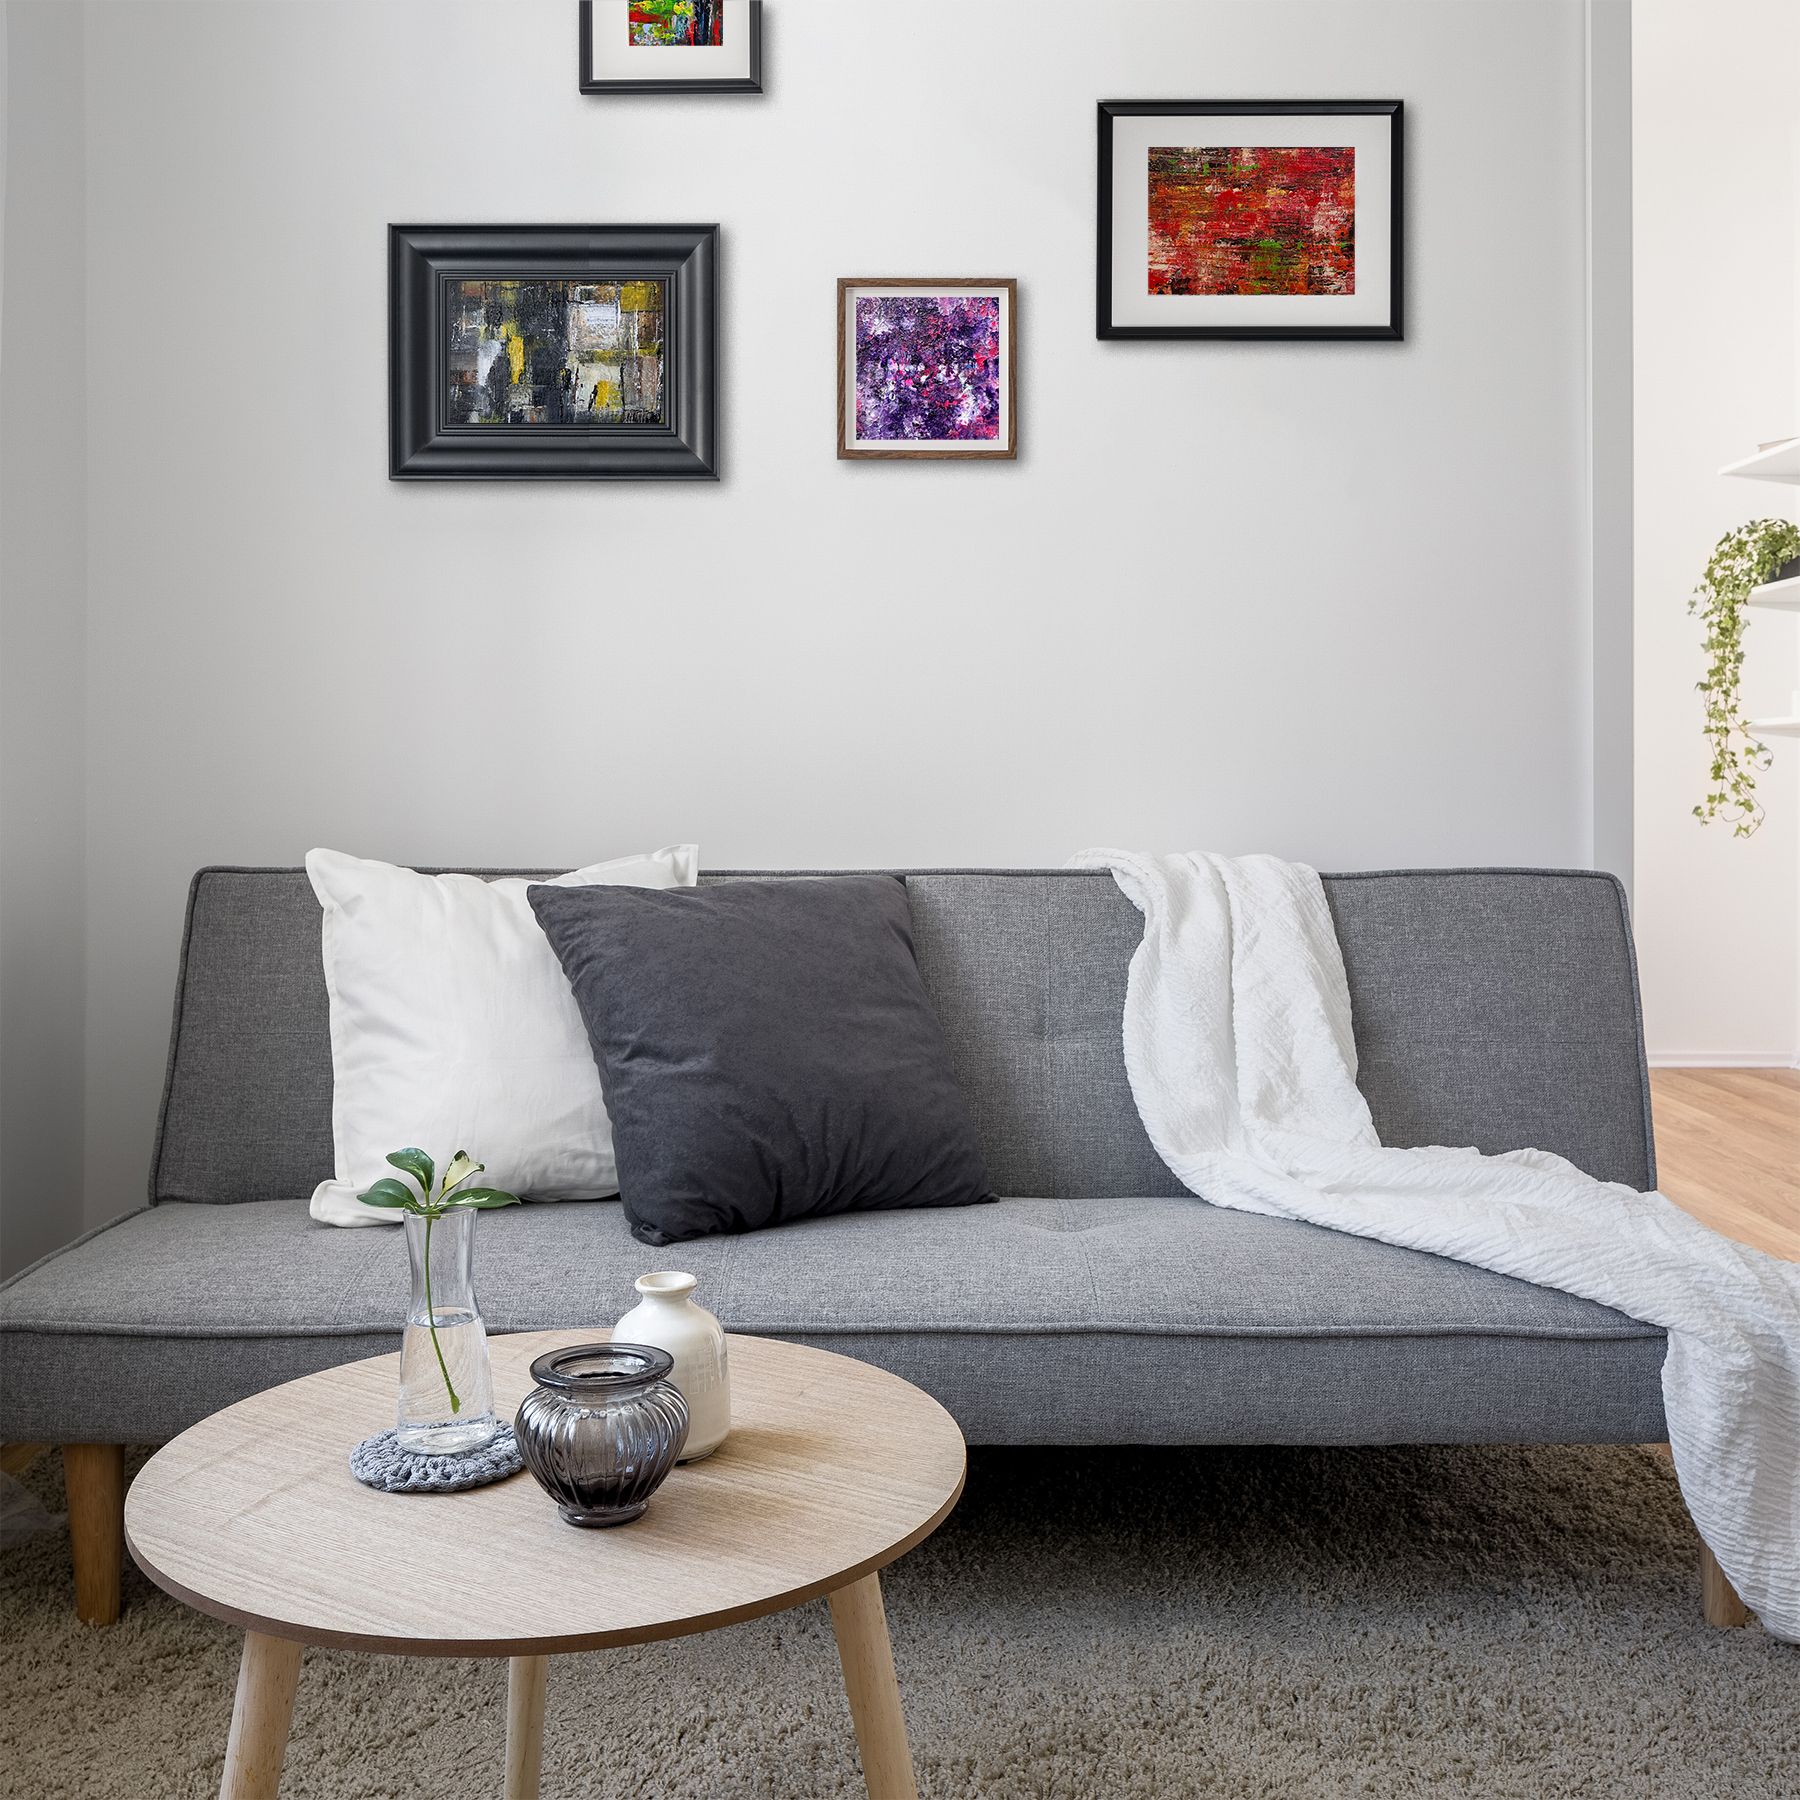 A home gallery wall showing 4 small abstract paintings on a soft grey wall in a room with a grey sofa and coffee table in the foreground